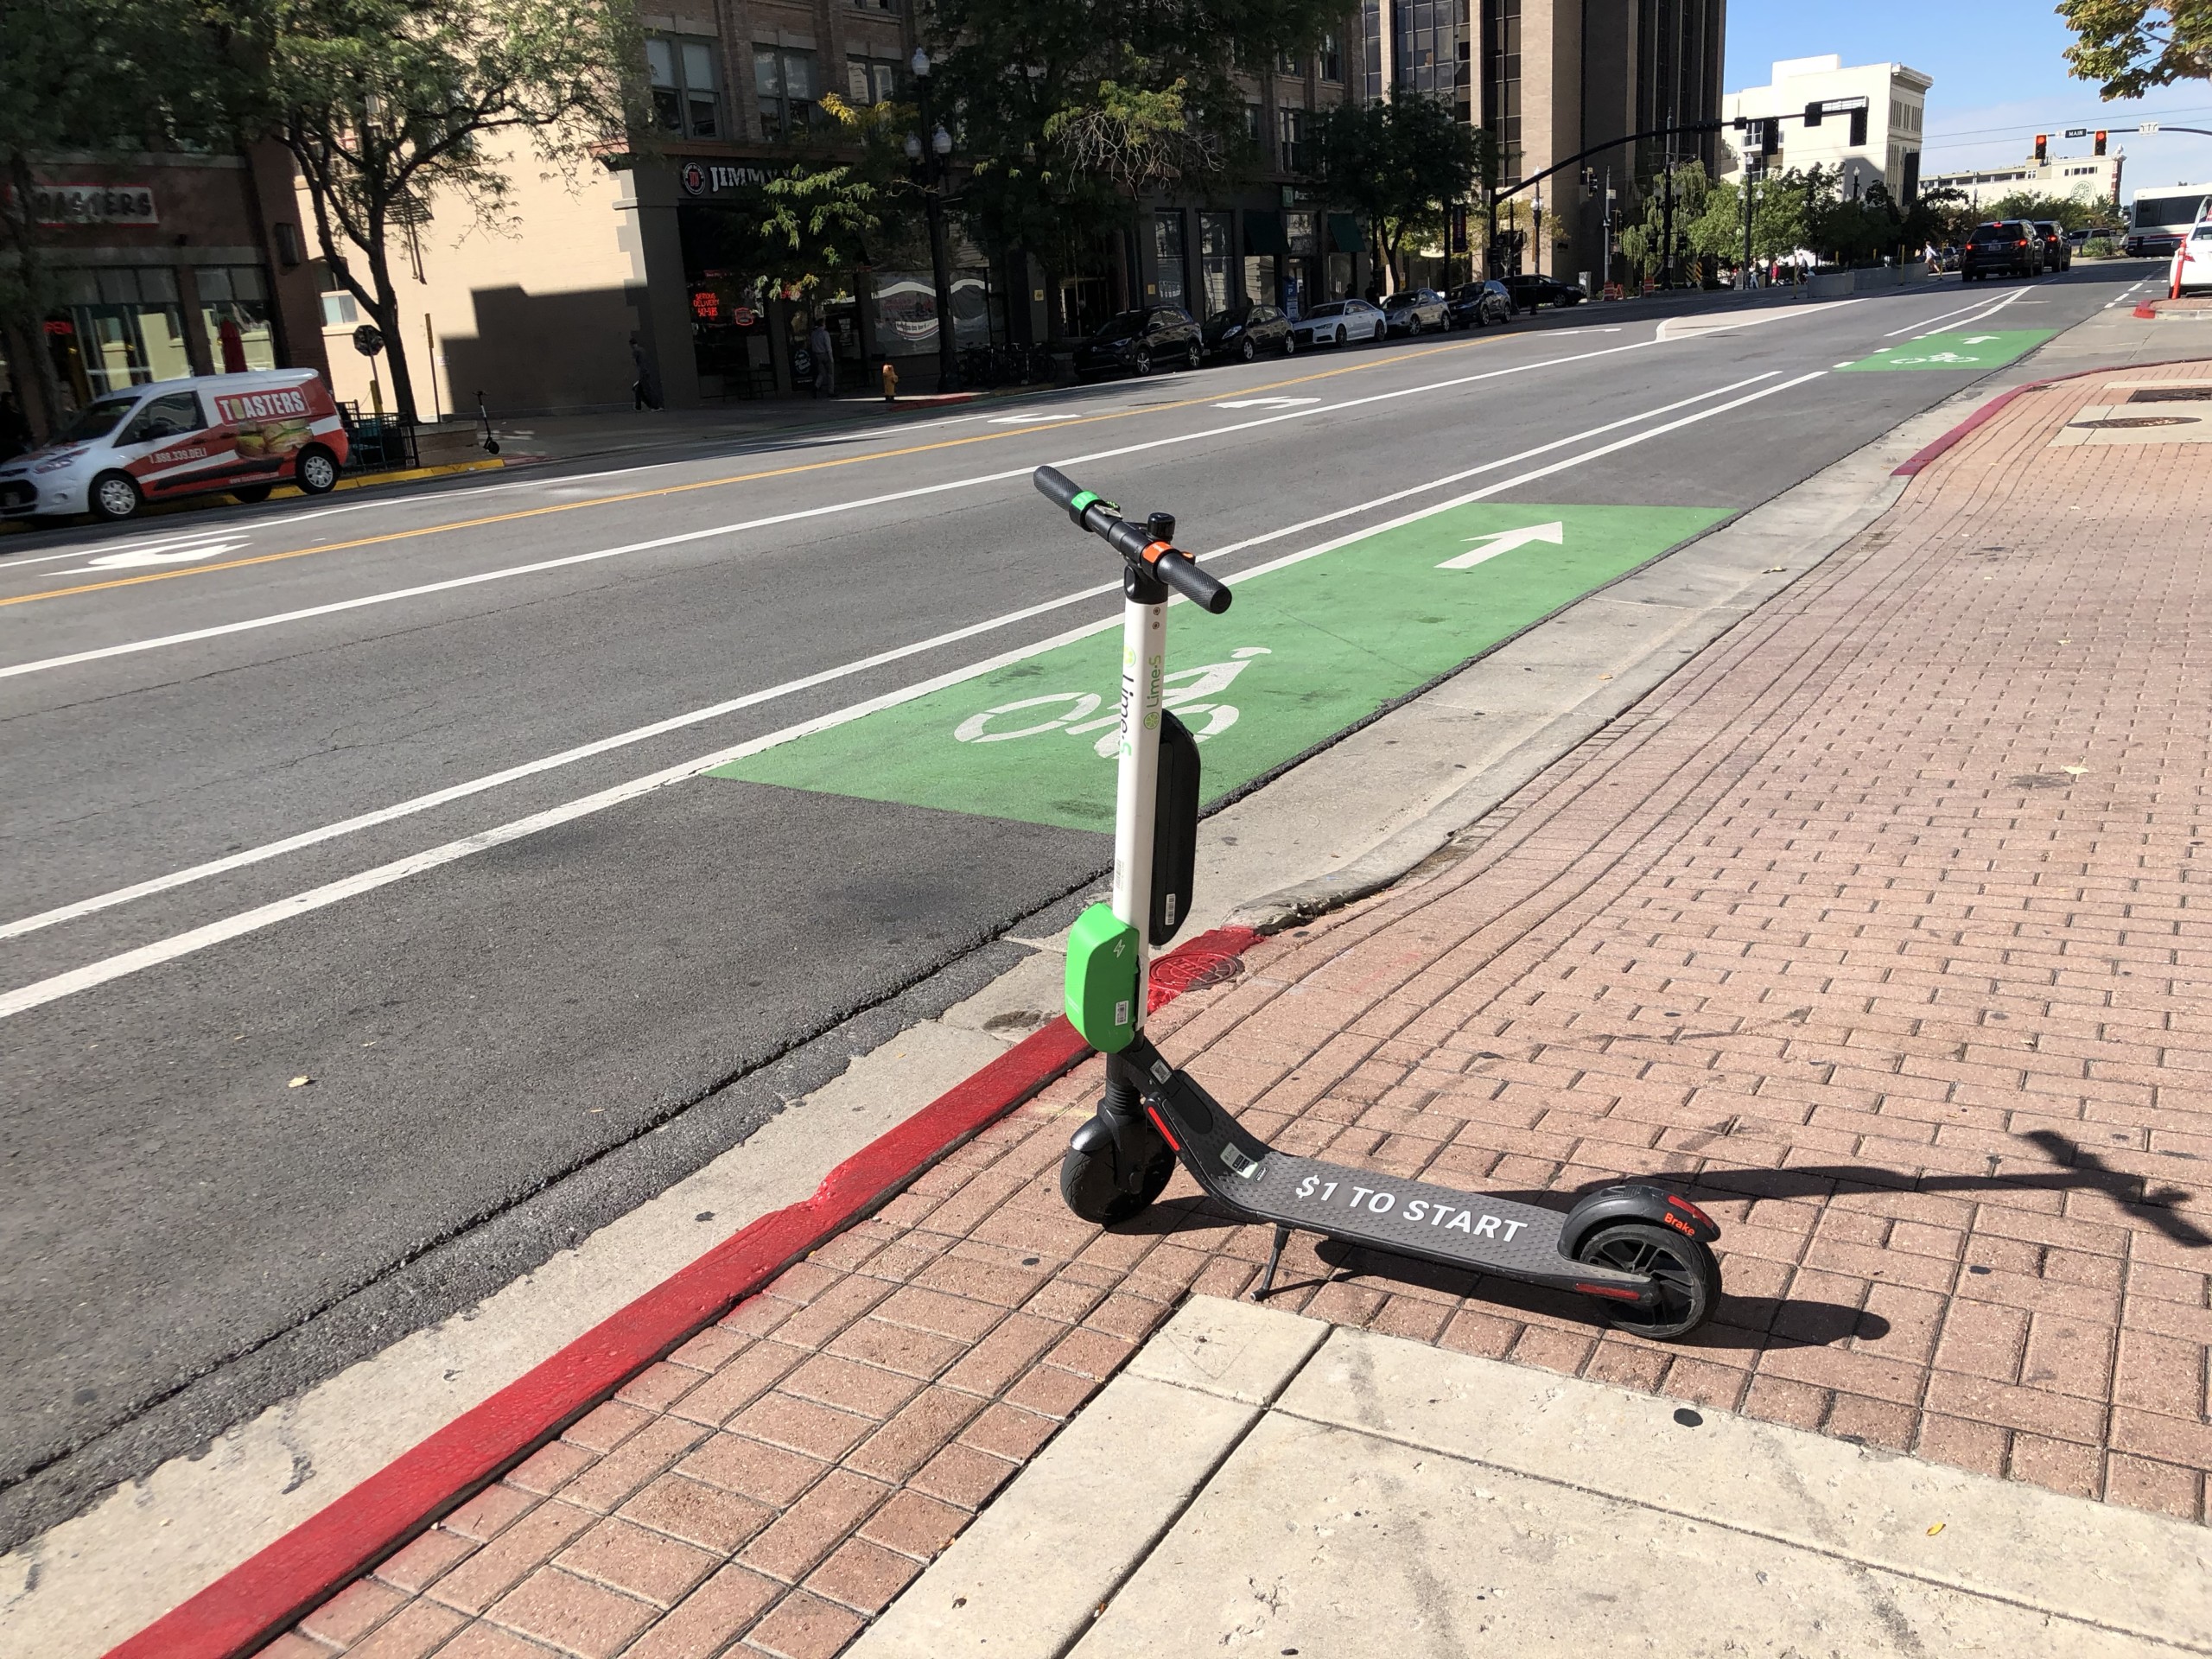 Scooter Riders & Bike Lanes